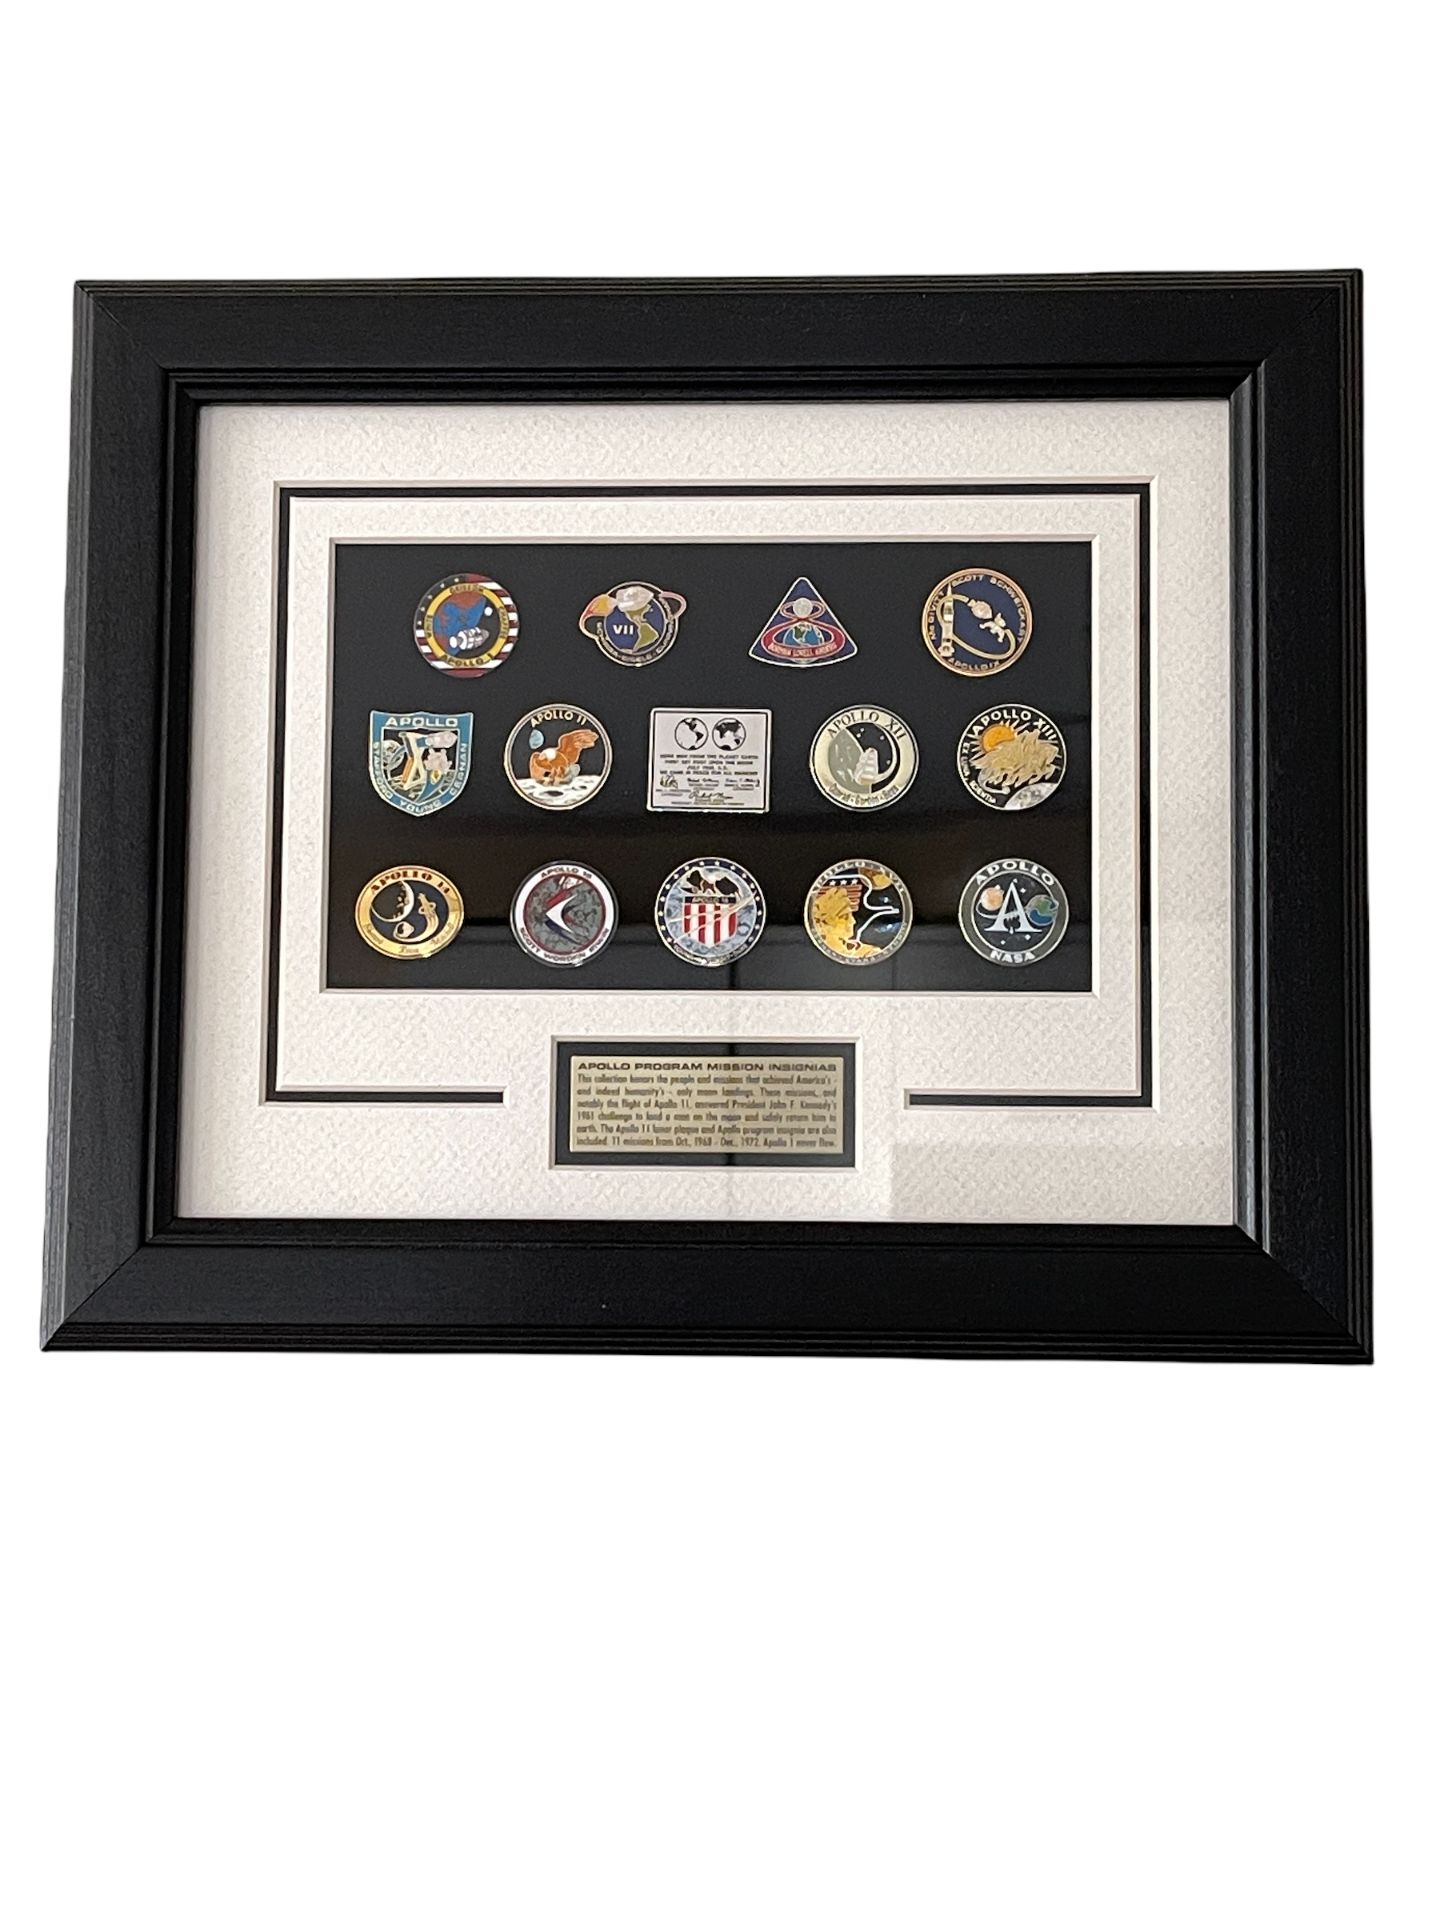 N2 NASA Staff Issue very Collectable APollo Program Mission Insignias - Image 2 of 5